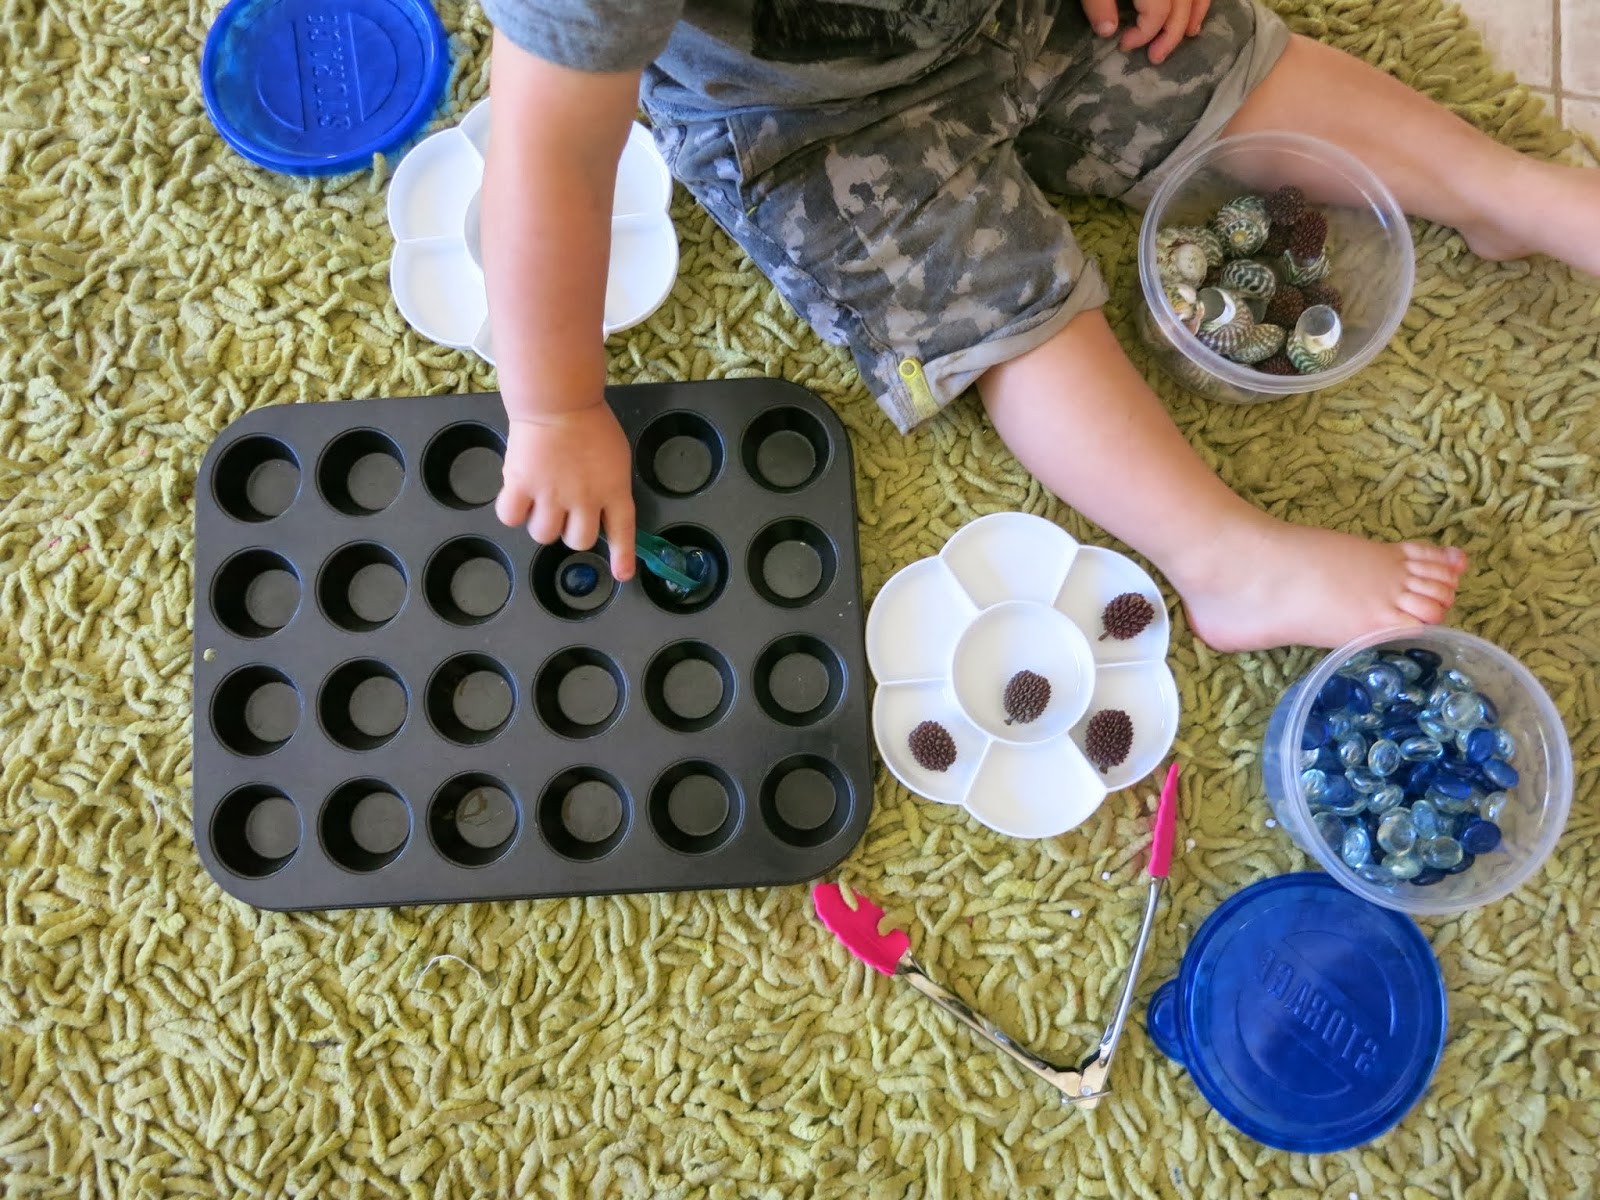 Setting up loose parts play for kids